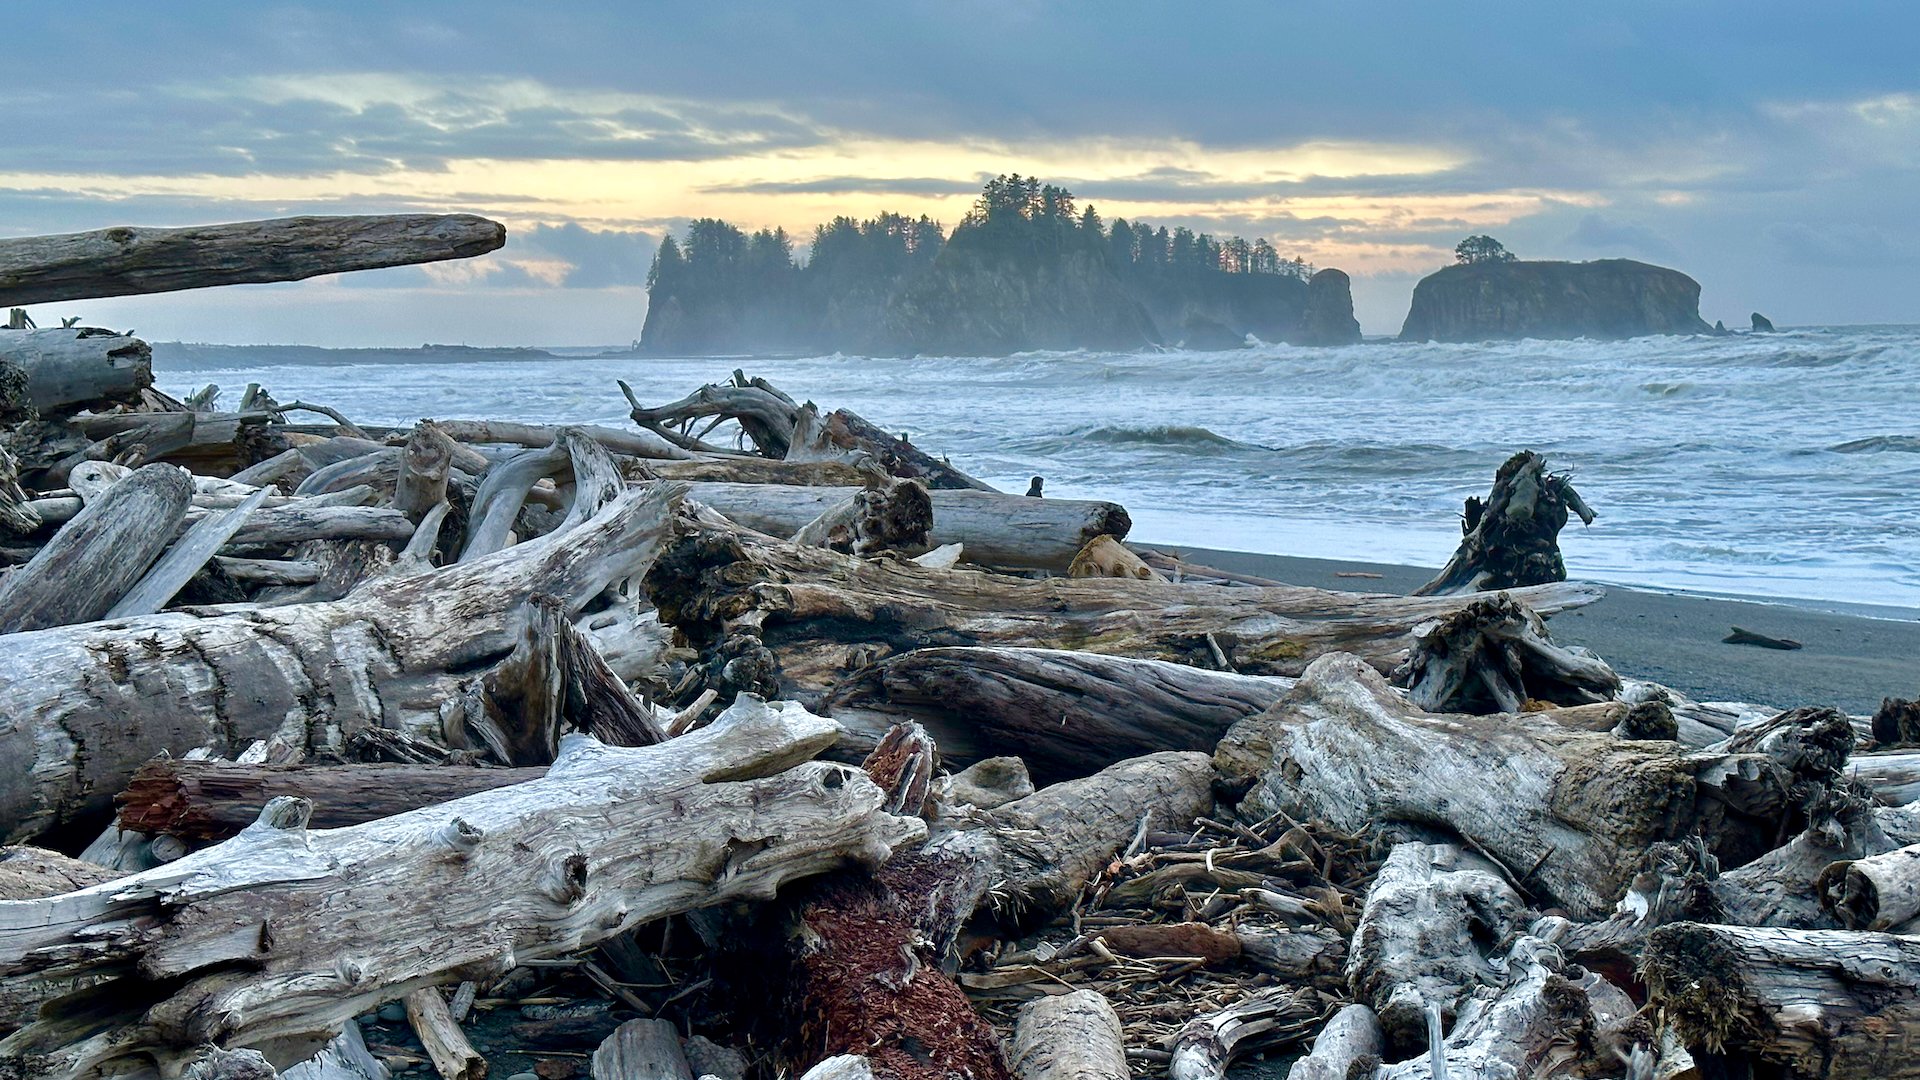  The piles of driftwood on the beach are immense. It’s hard to imagine how long it’s taken for them to pile up.  